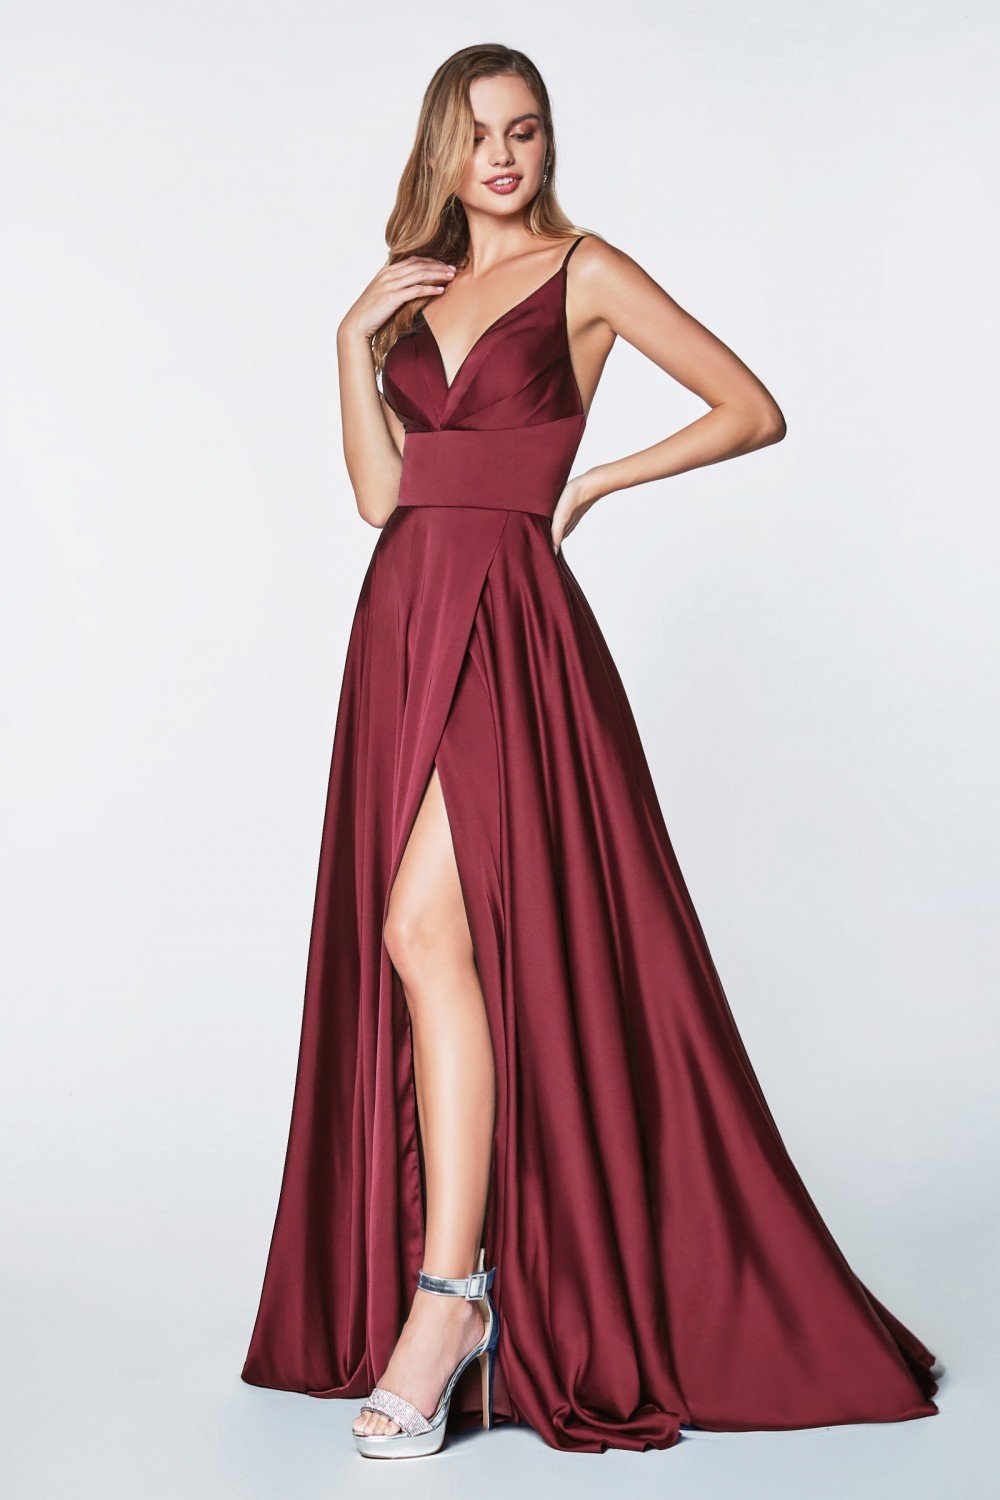 Cinderella Divine - 7472 V Neck Pleated Bodice High Slit Wrap Satin Gown In Red